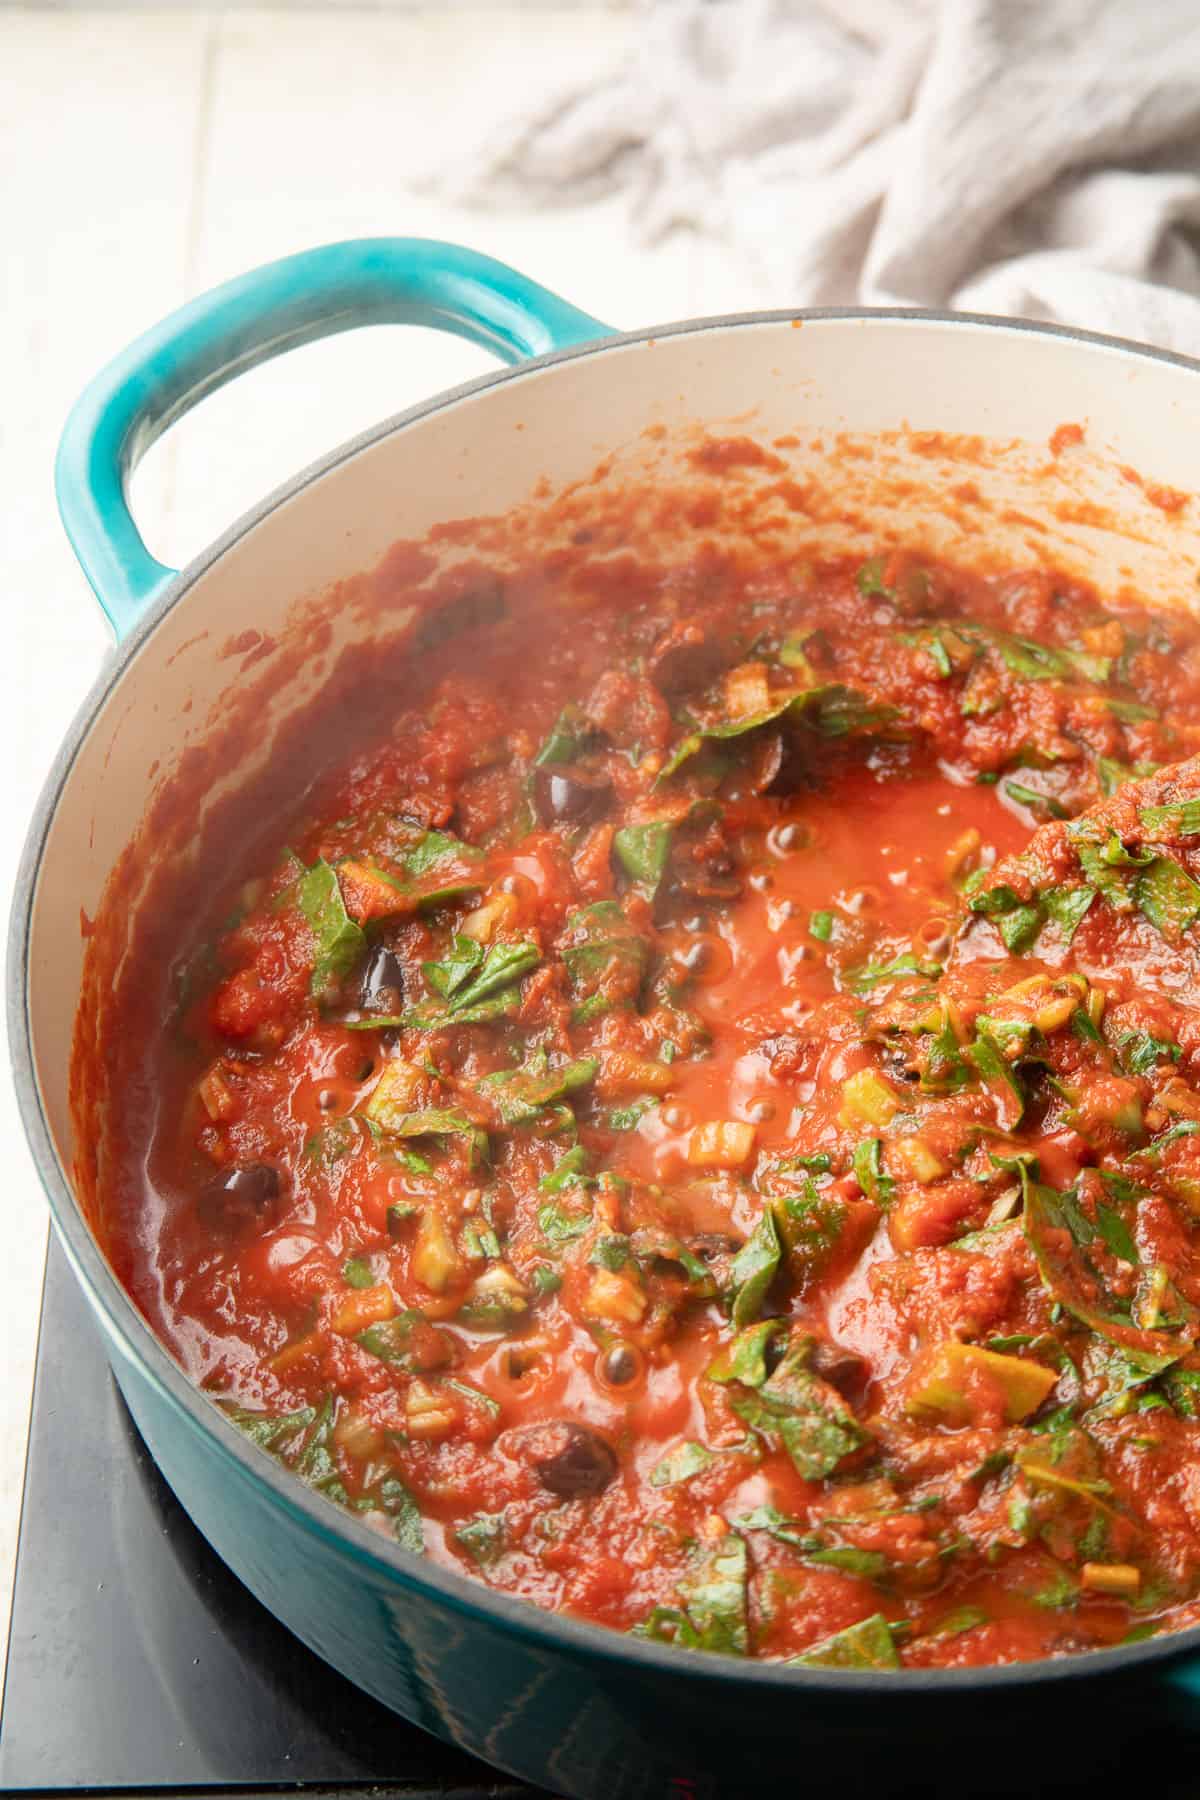 Swiss chard cooking in tomato sauce in a pot.